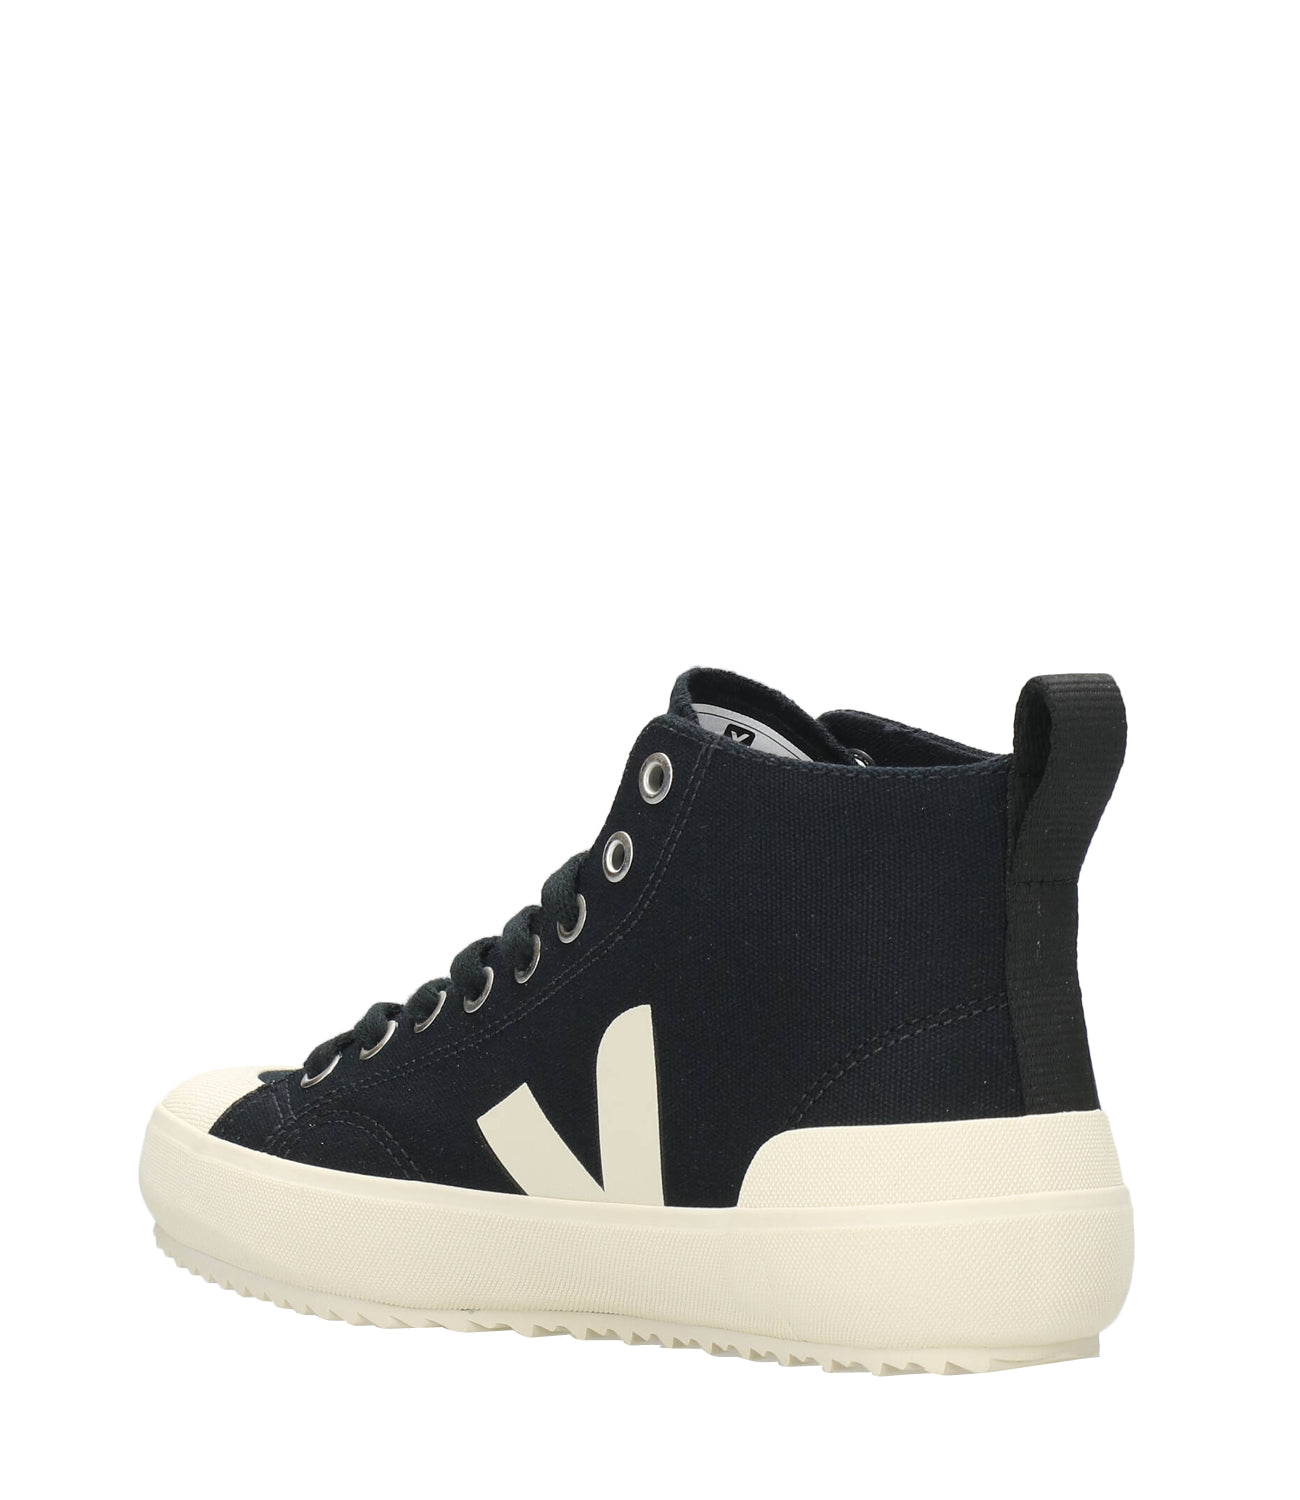 Veja | High Sneakers Black and White